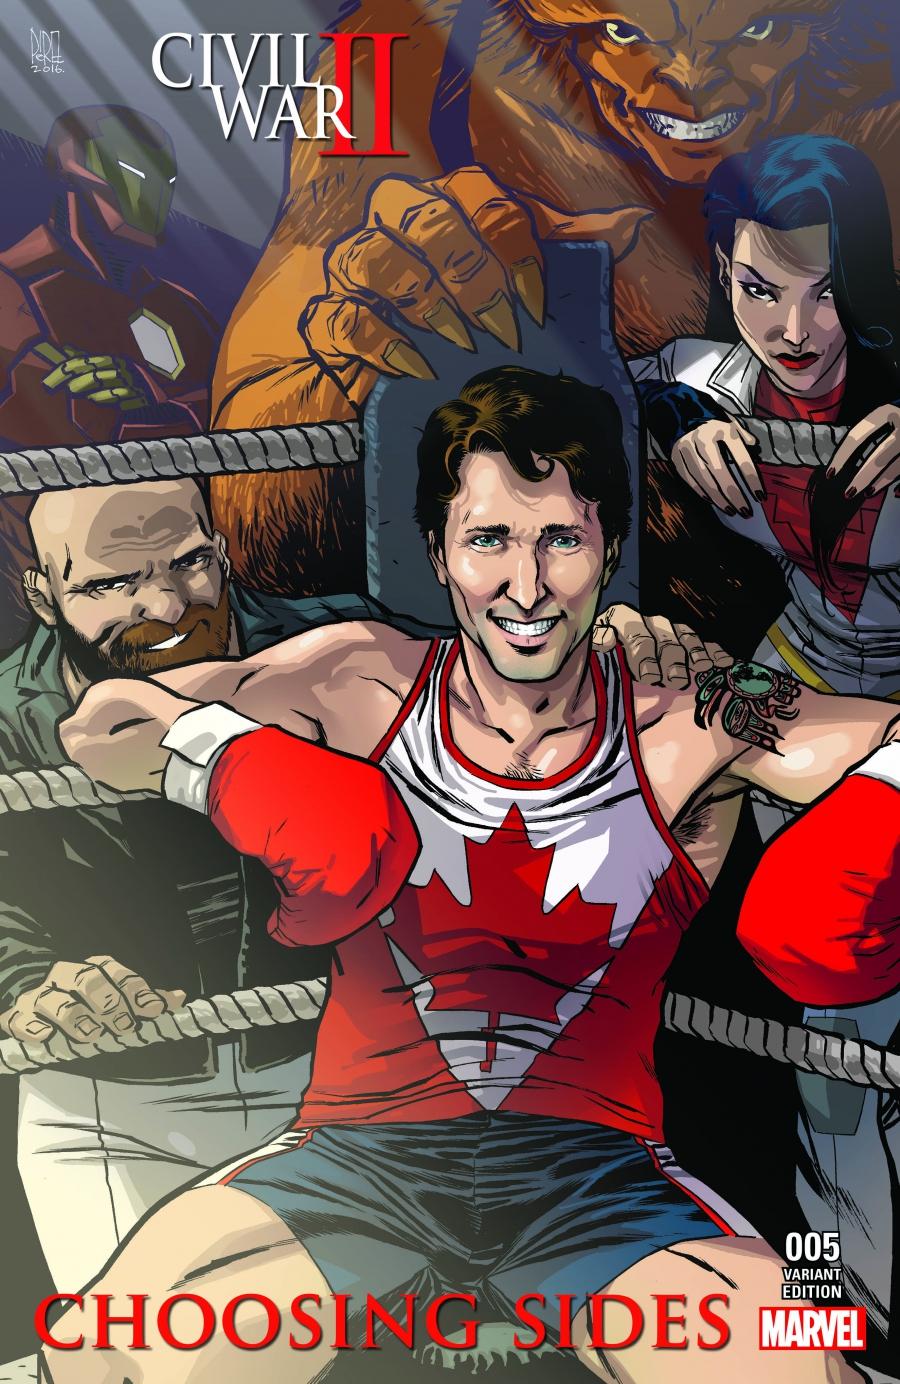 Justin Trudeau's new Marvel cover, which features him in a boxing uniform